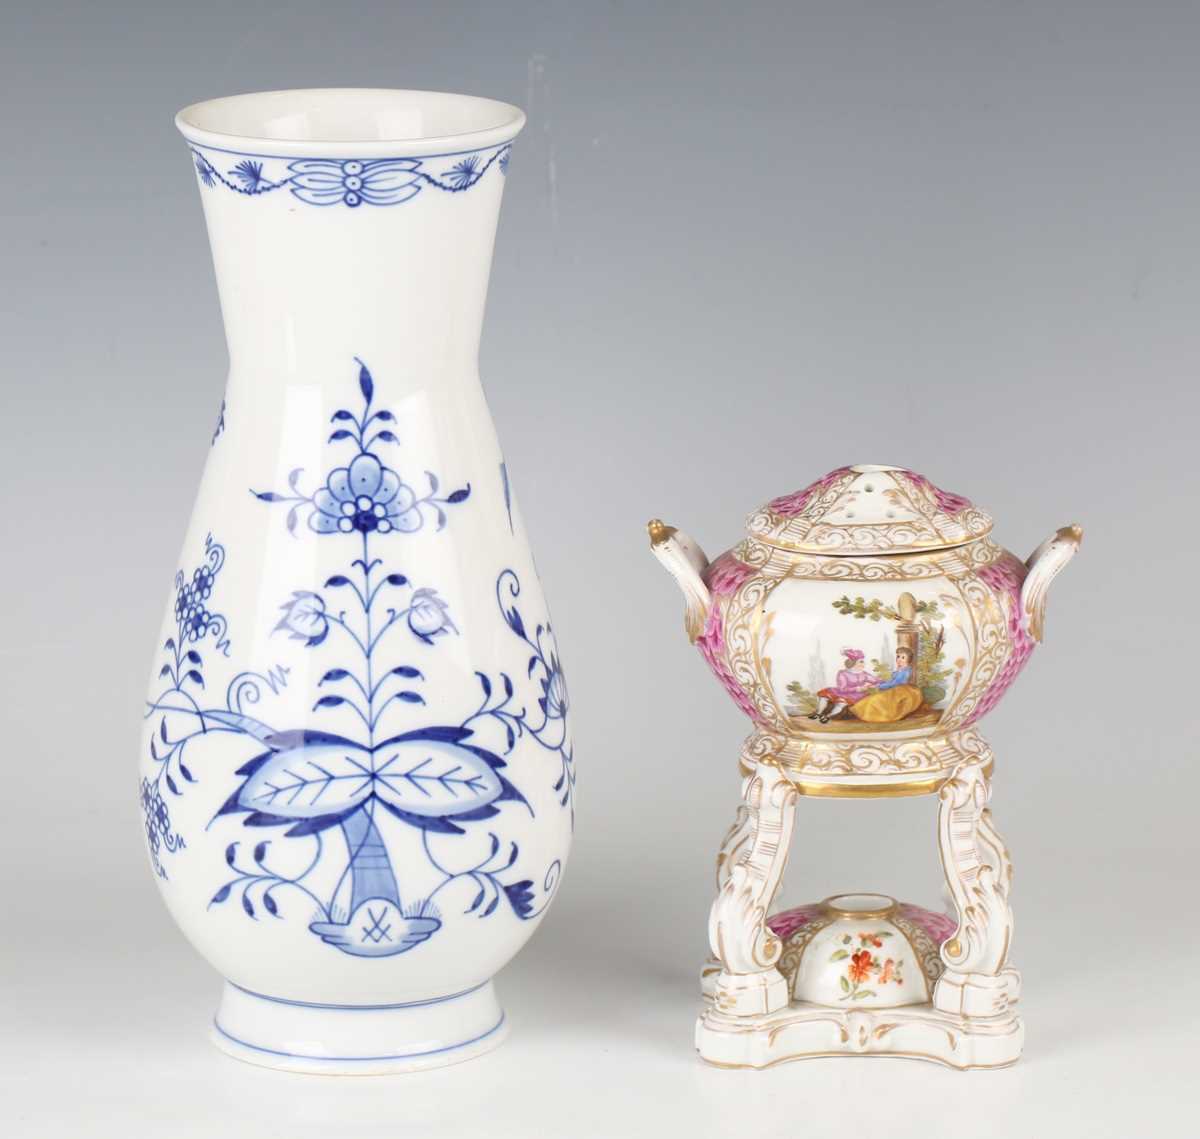 A Meissen Onion pattern vase, 20th century, the low-bellied body with flared neck, underglaze blue